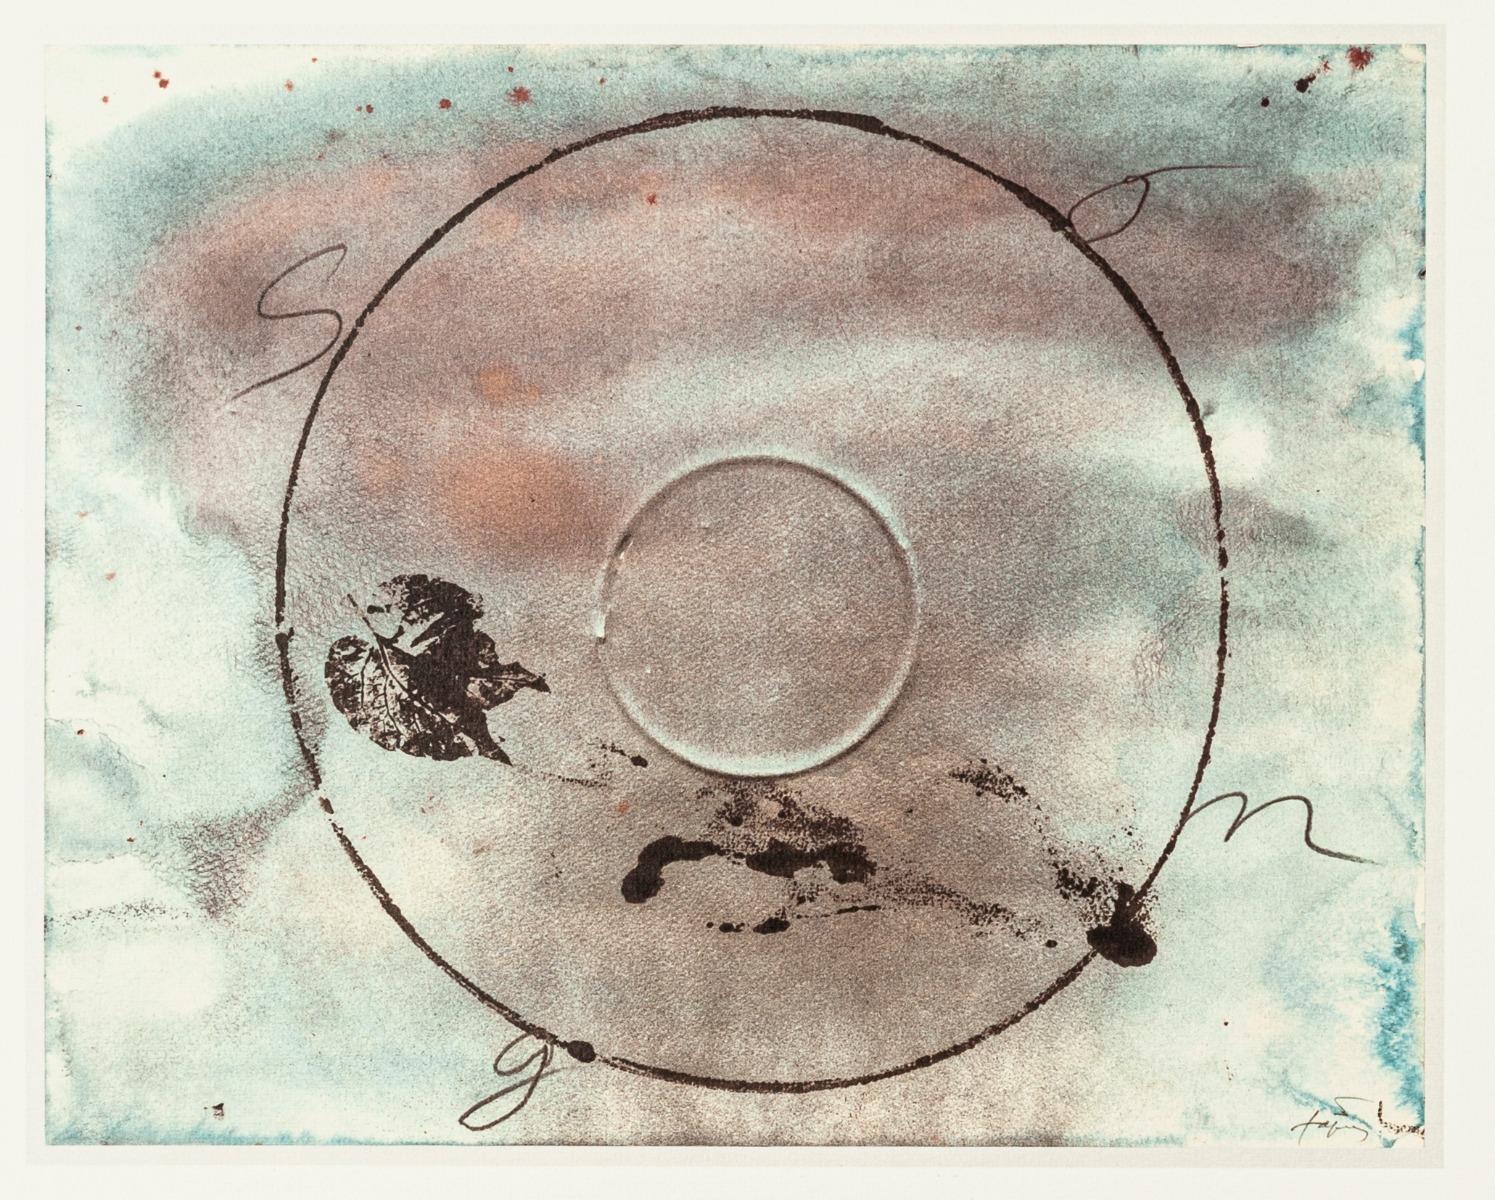 Antoni Tàpies (after) Abstract Print - Memory of the Songs - Vintage Offset Print After Antoni Tàpies - 1982